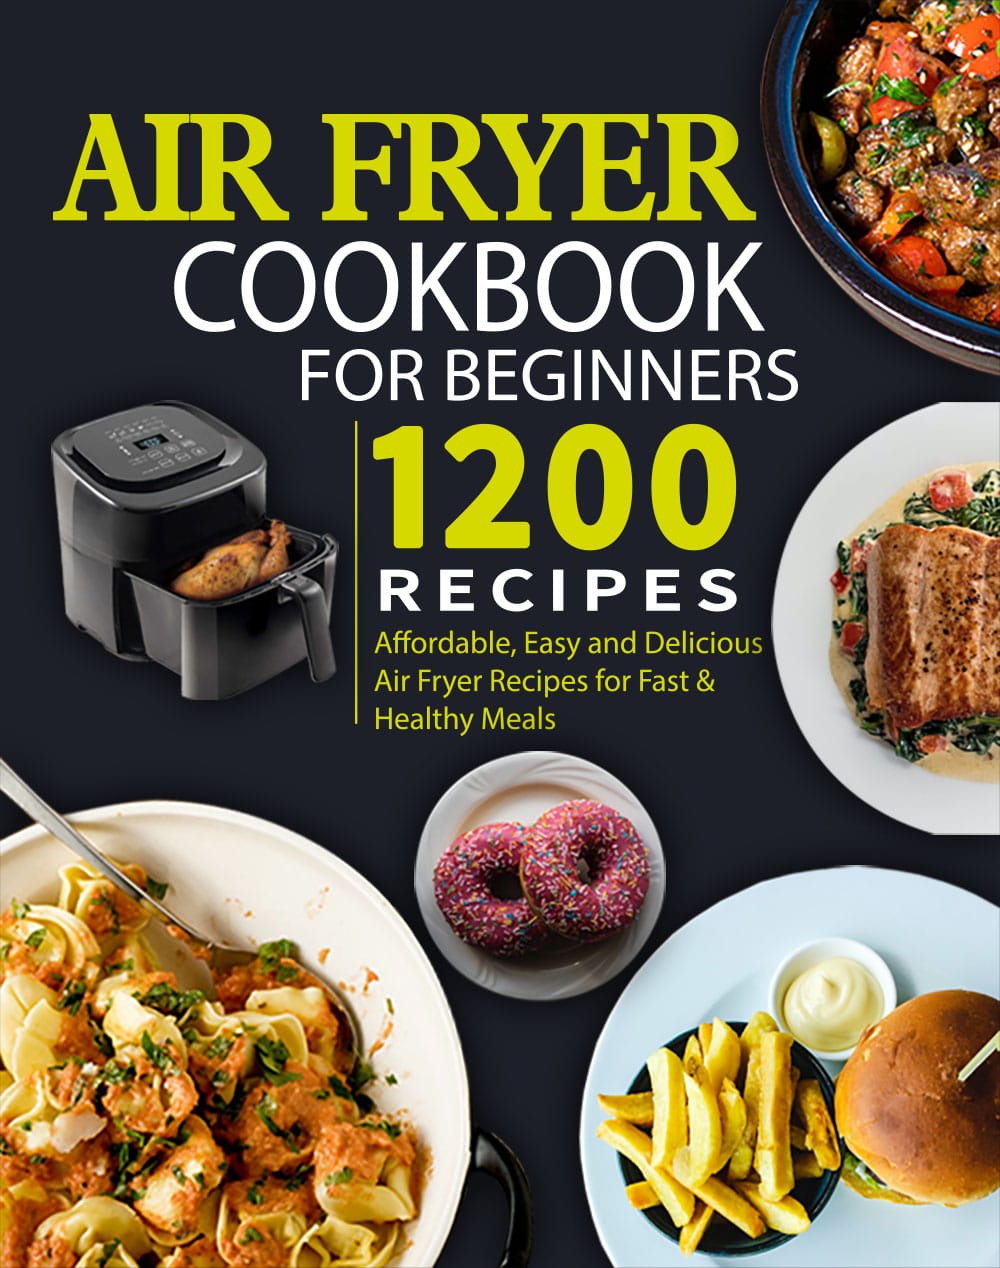 Air Fryer Cookbook For Beginners With